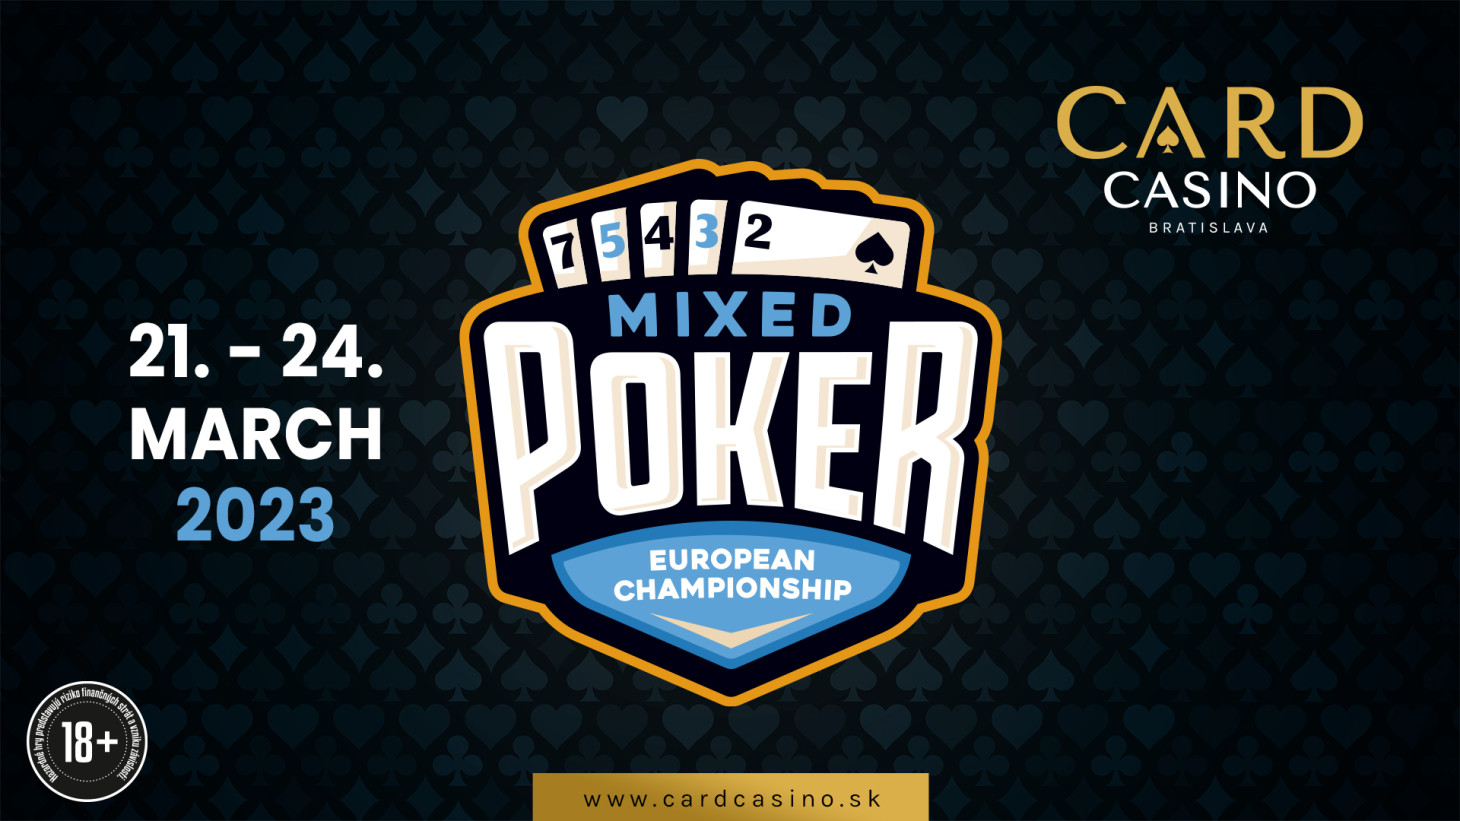 The variation of poker in all its forms. Mixed Games Championship awaits